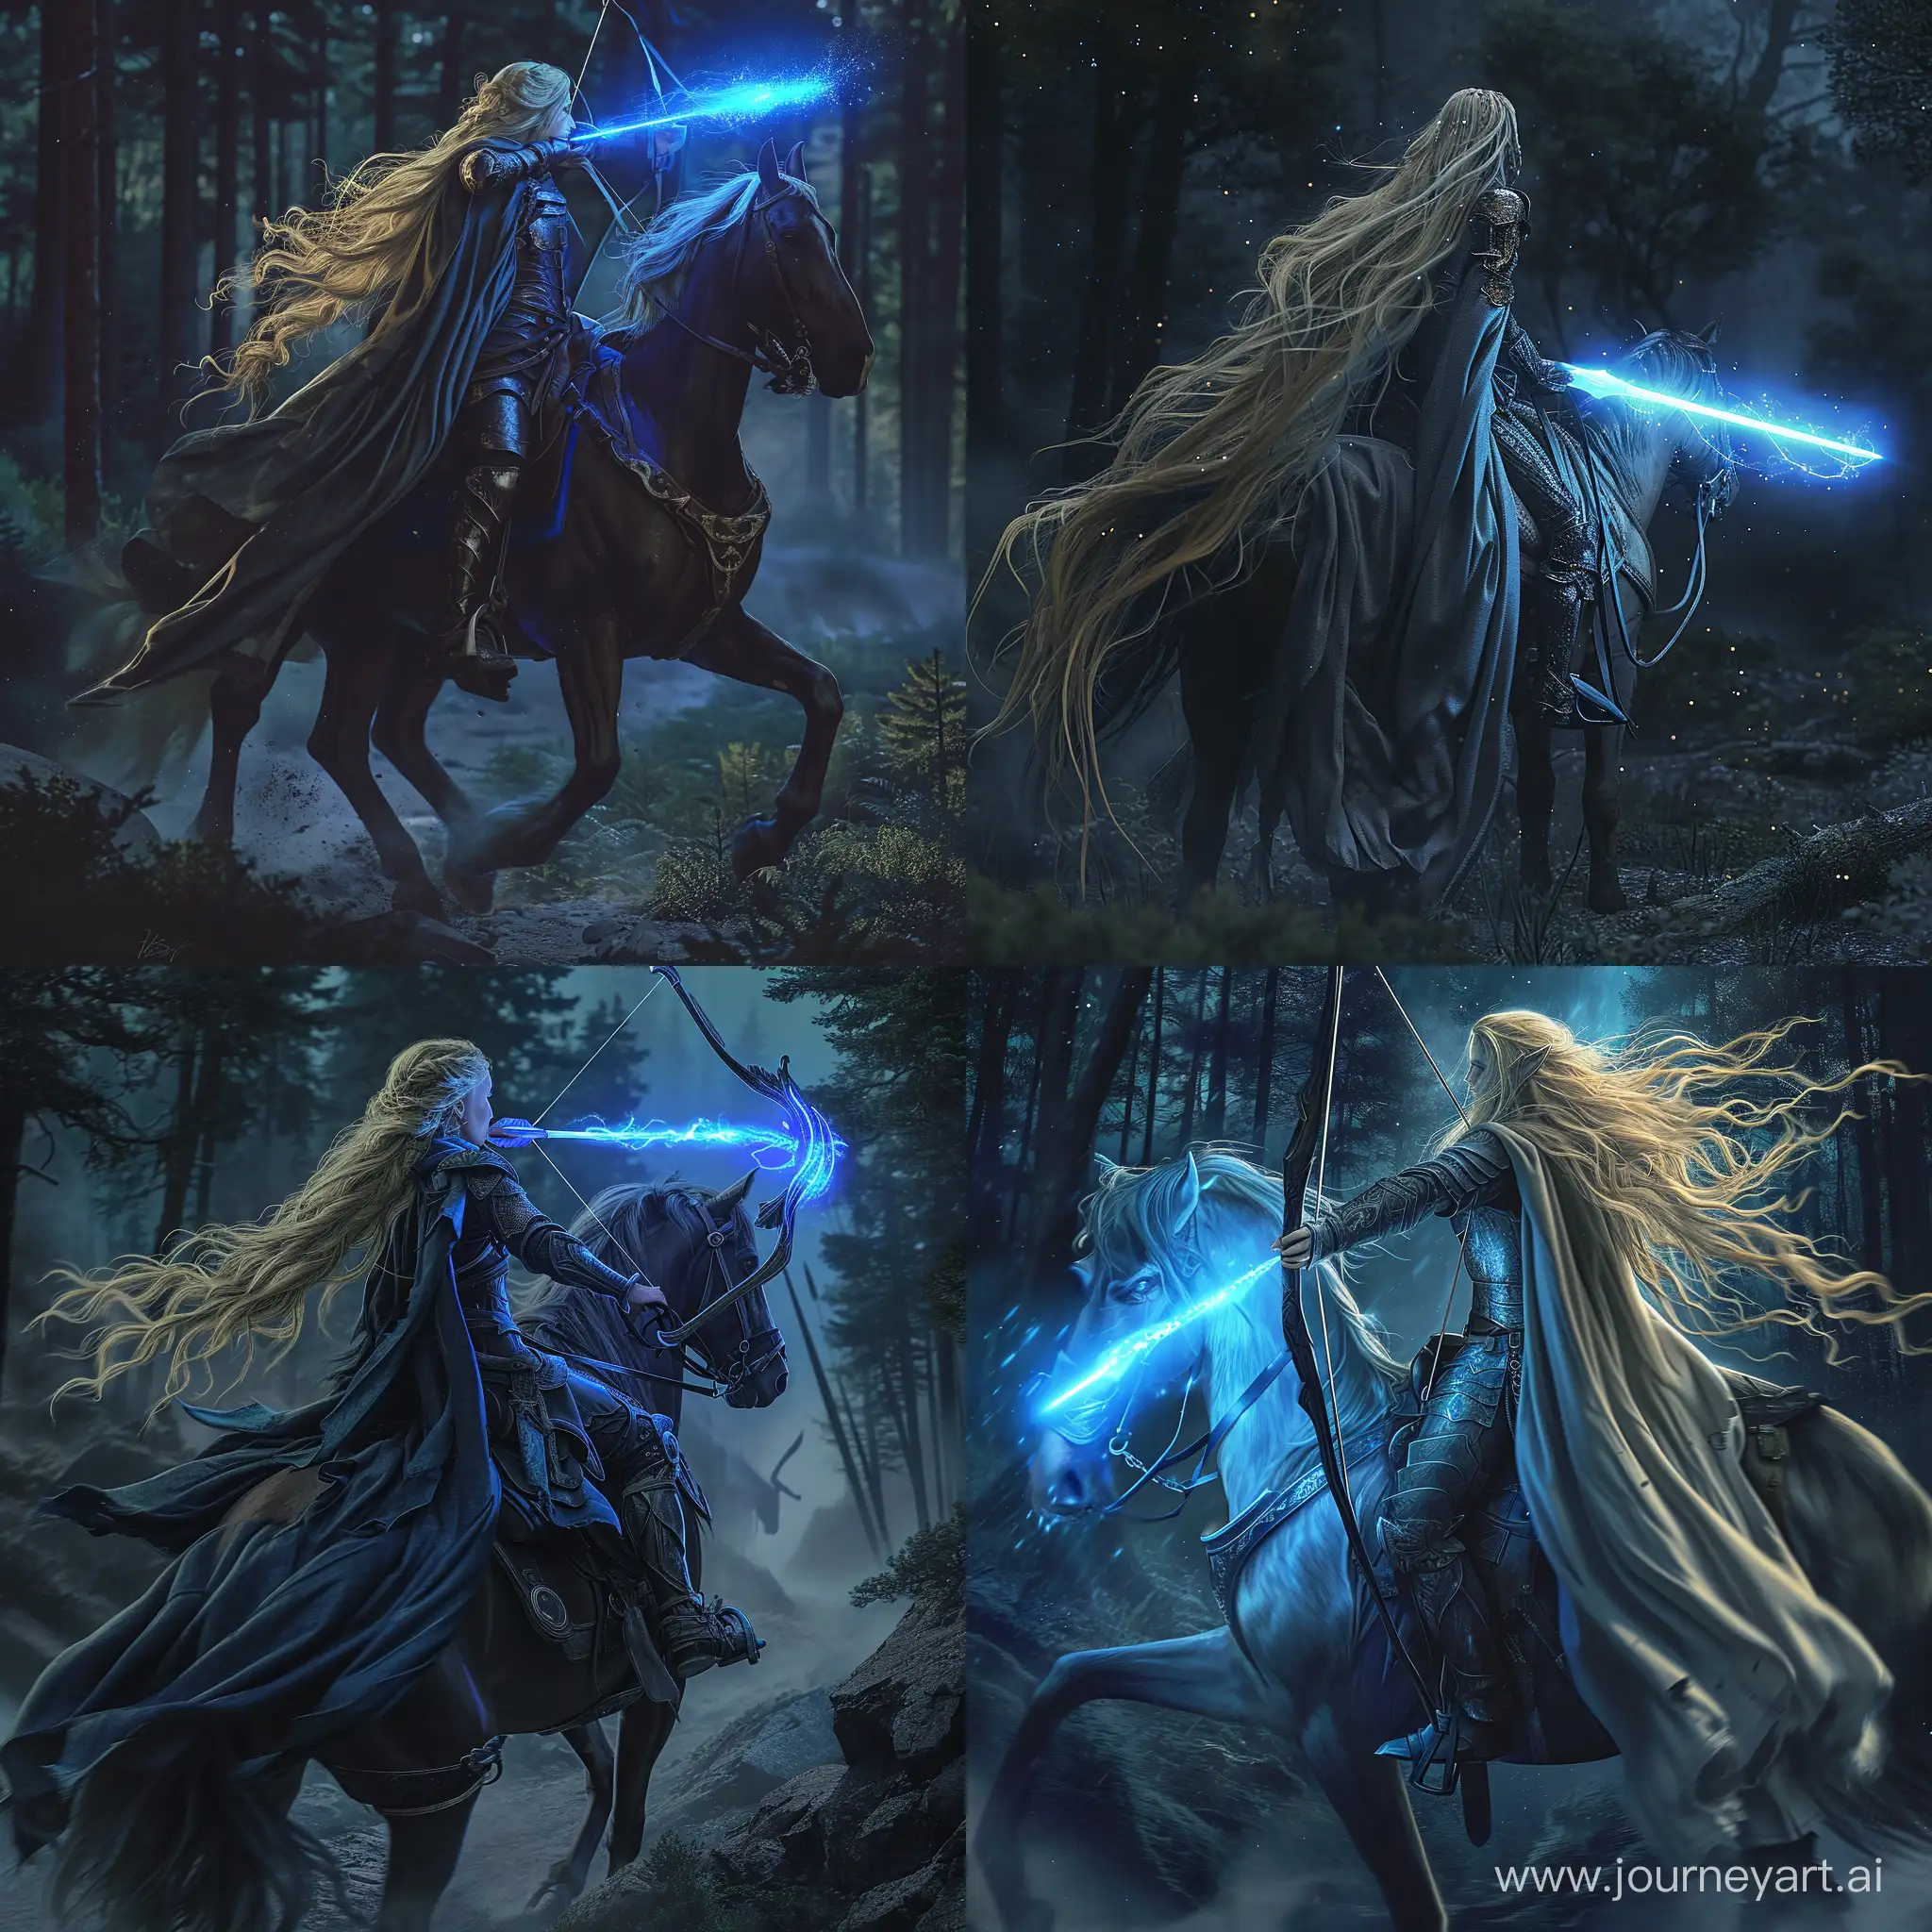 Warrior princess, long blonde hair, riding on horseback at pace, night forest, wielding a glowing blue bow, side view, cloaked, armored, photorealistic